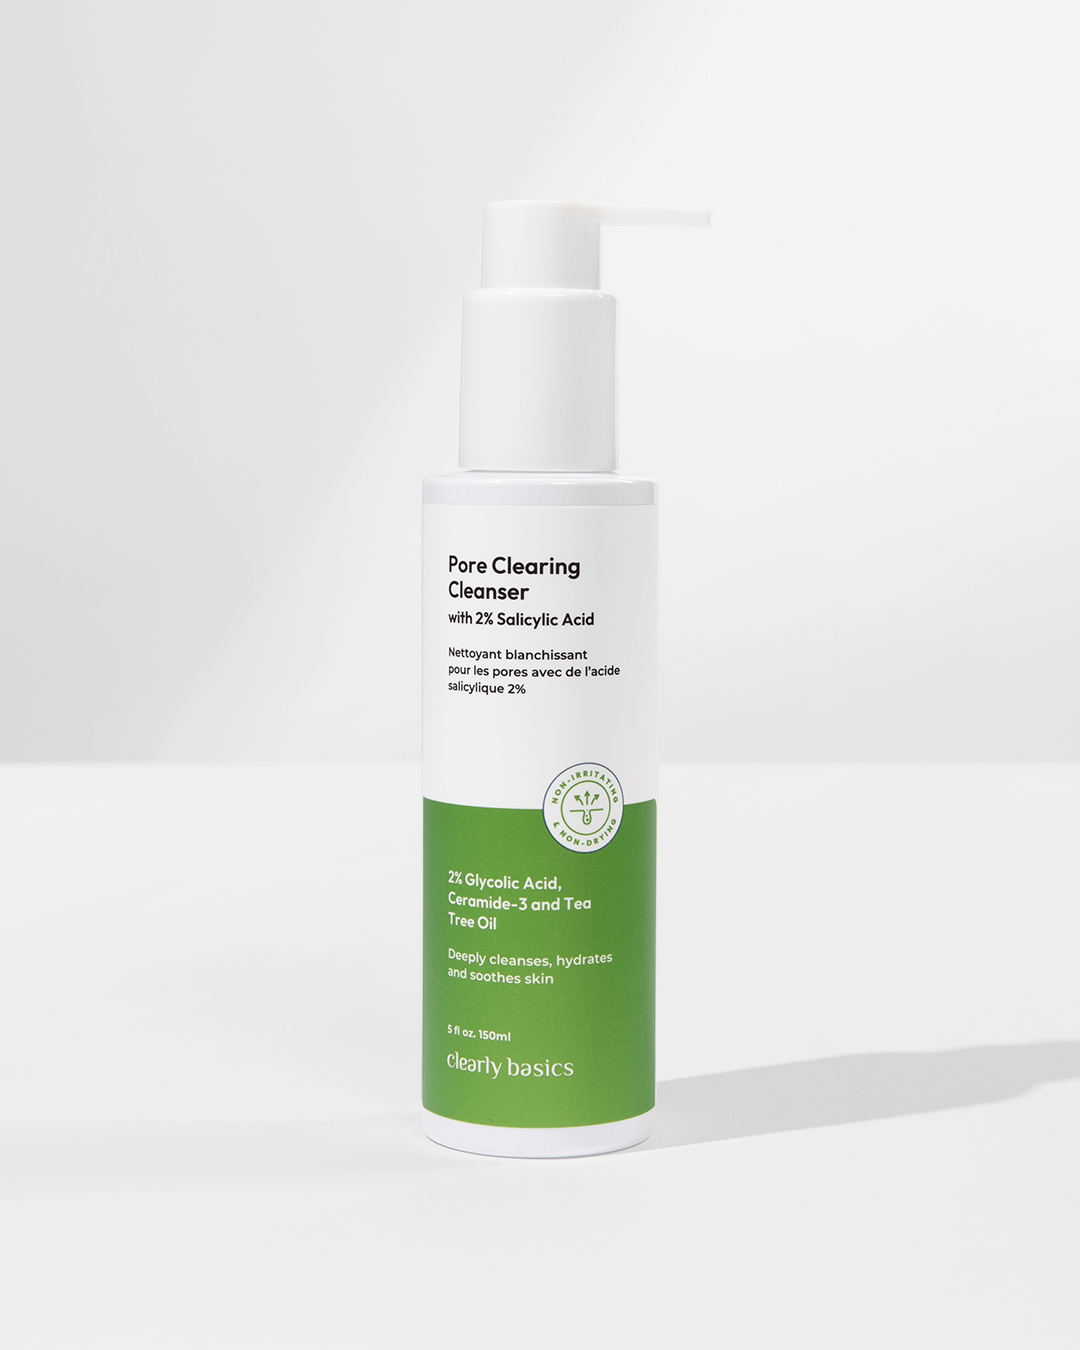 Pore Clearing Cleanser